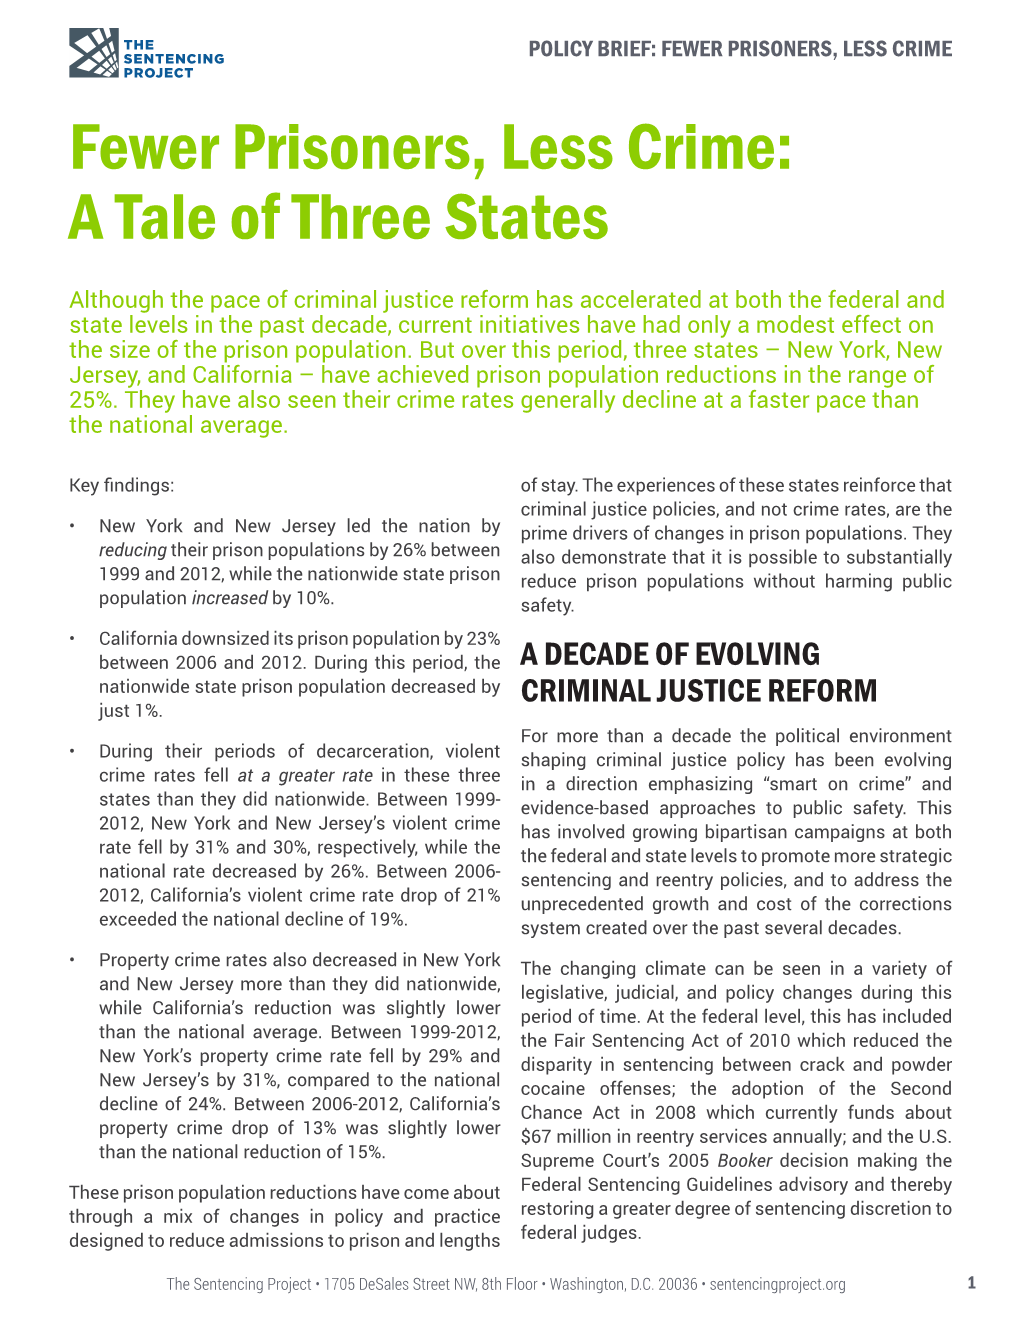 FEWER PRISONERS, LESS CRIME Fewer Prisoners, Less Crime: a Tale of Three States